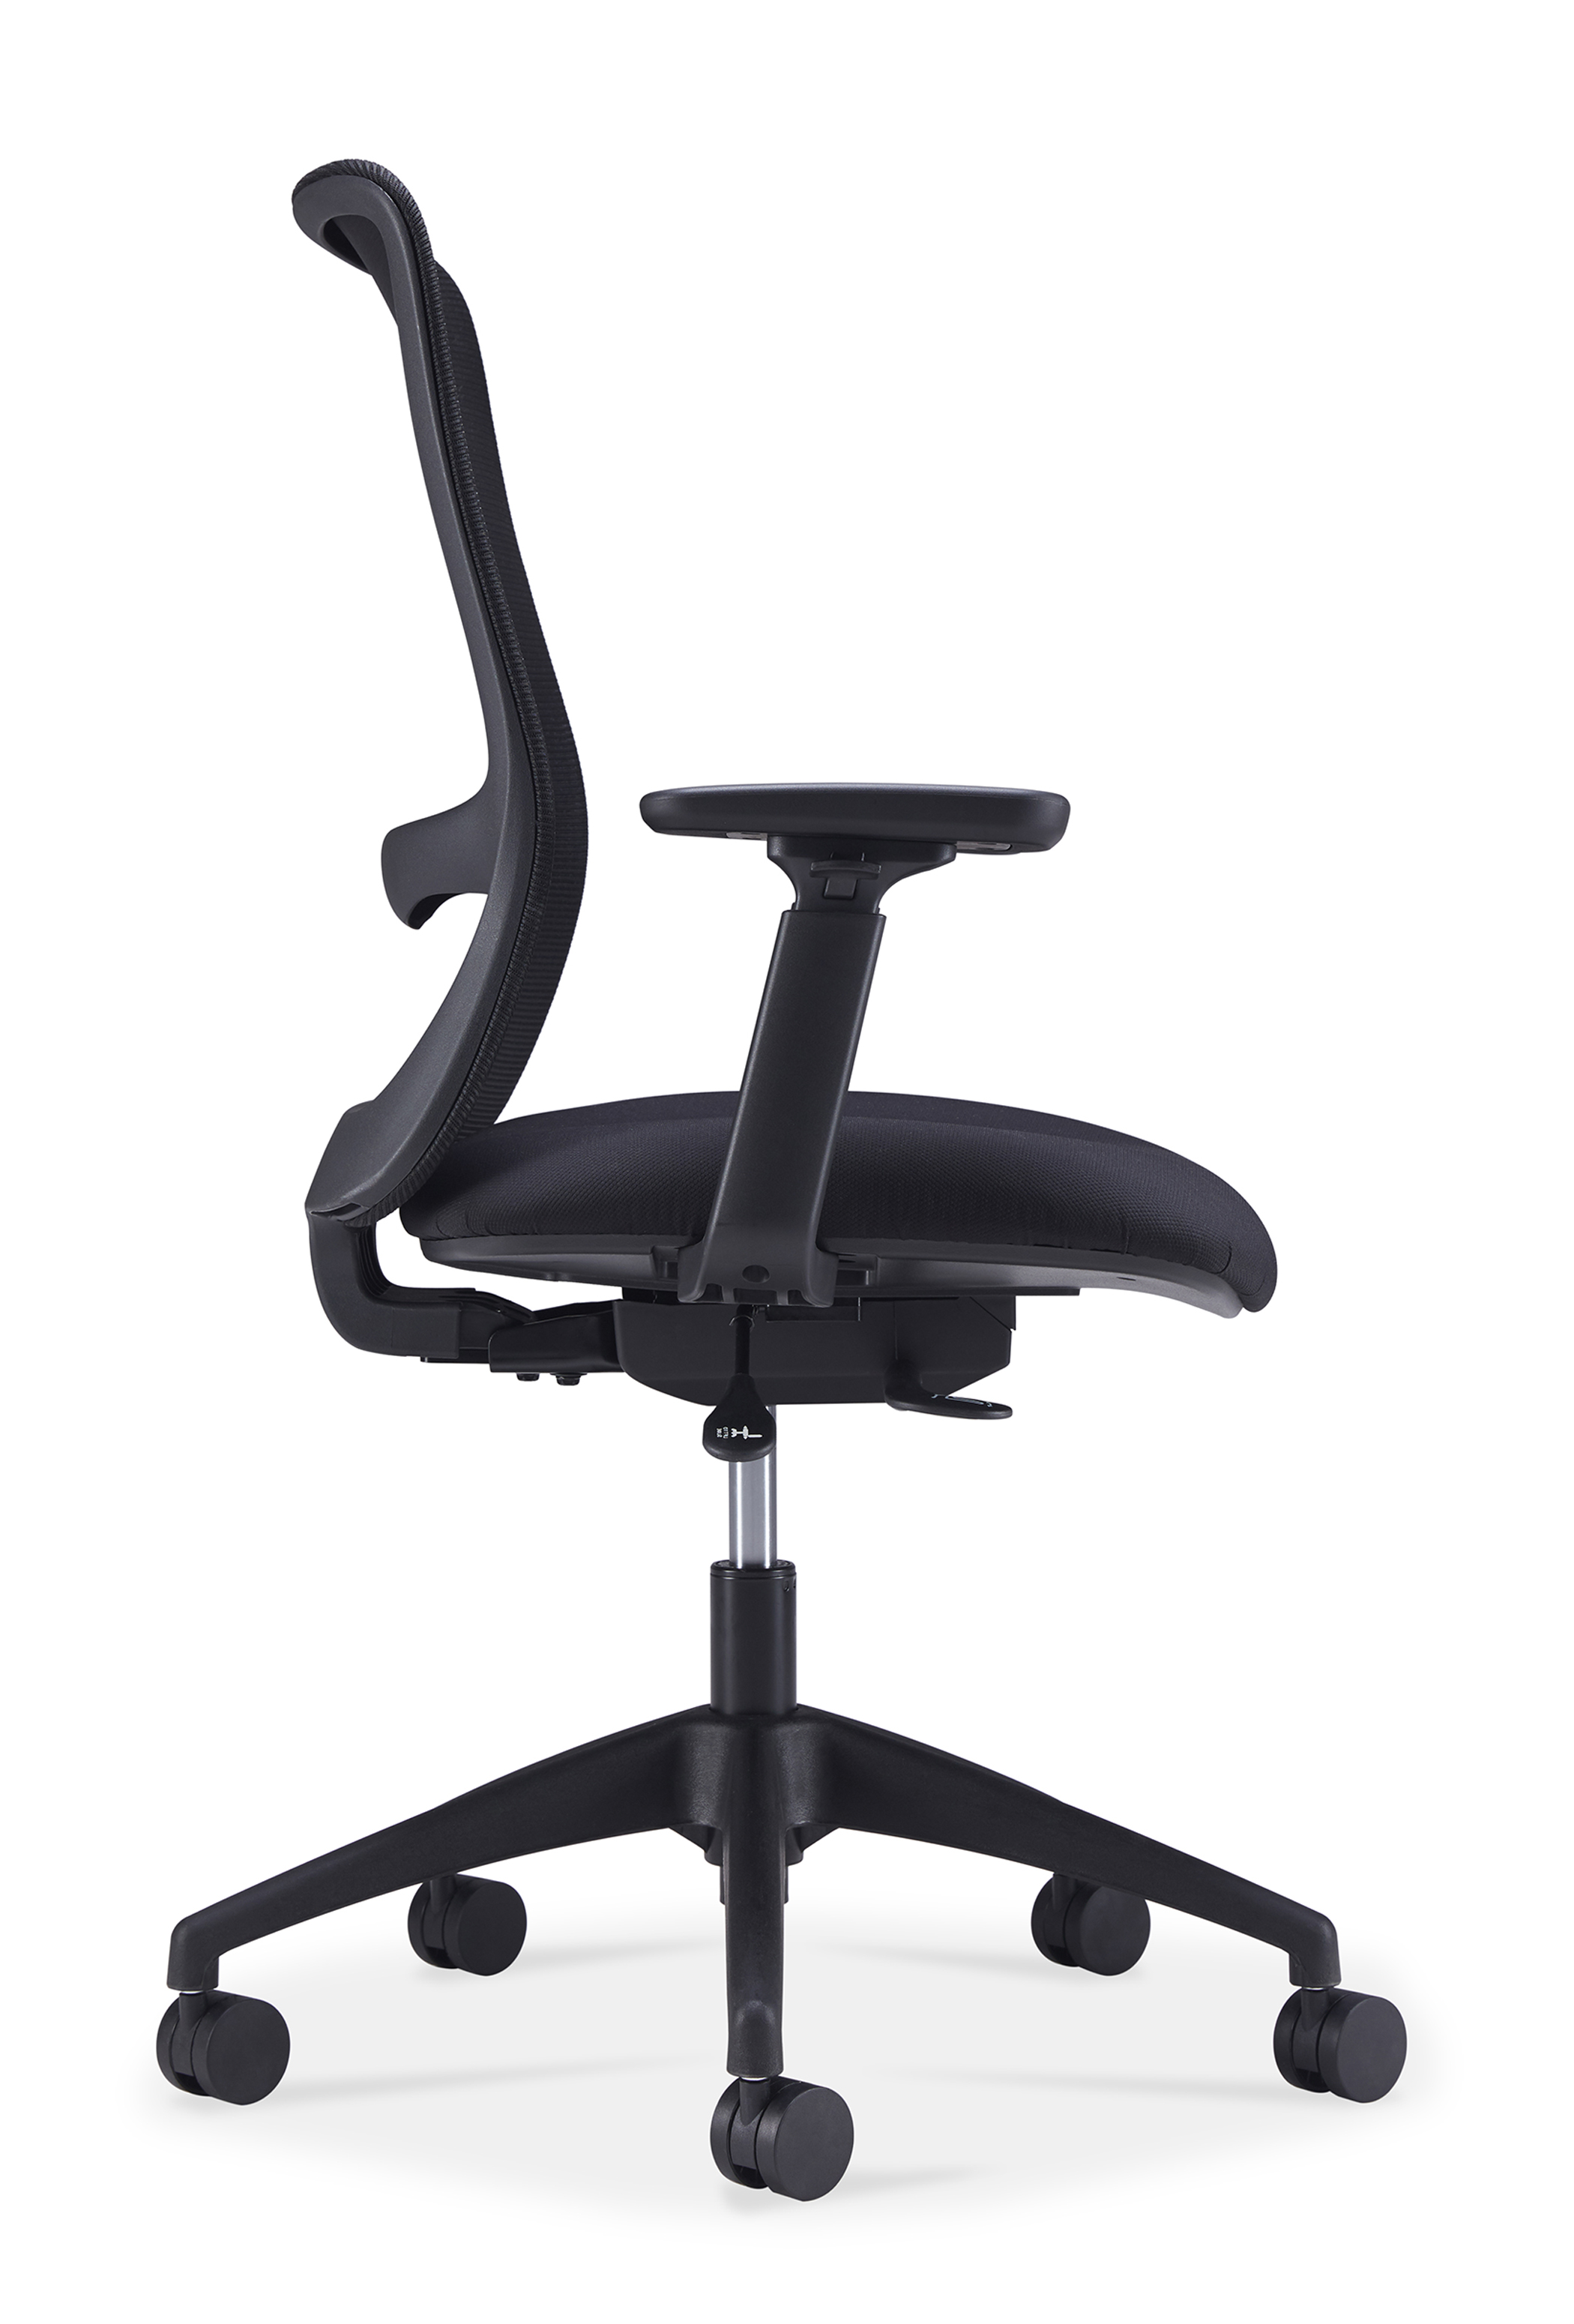 WS - L21 task chair (Side)